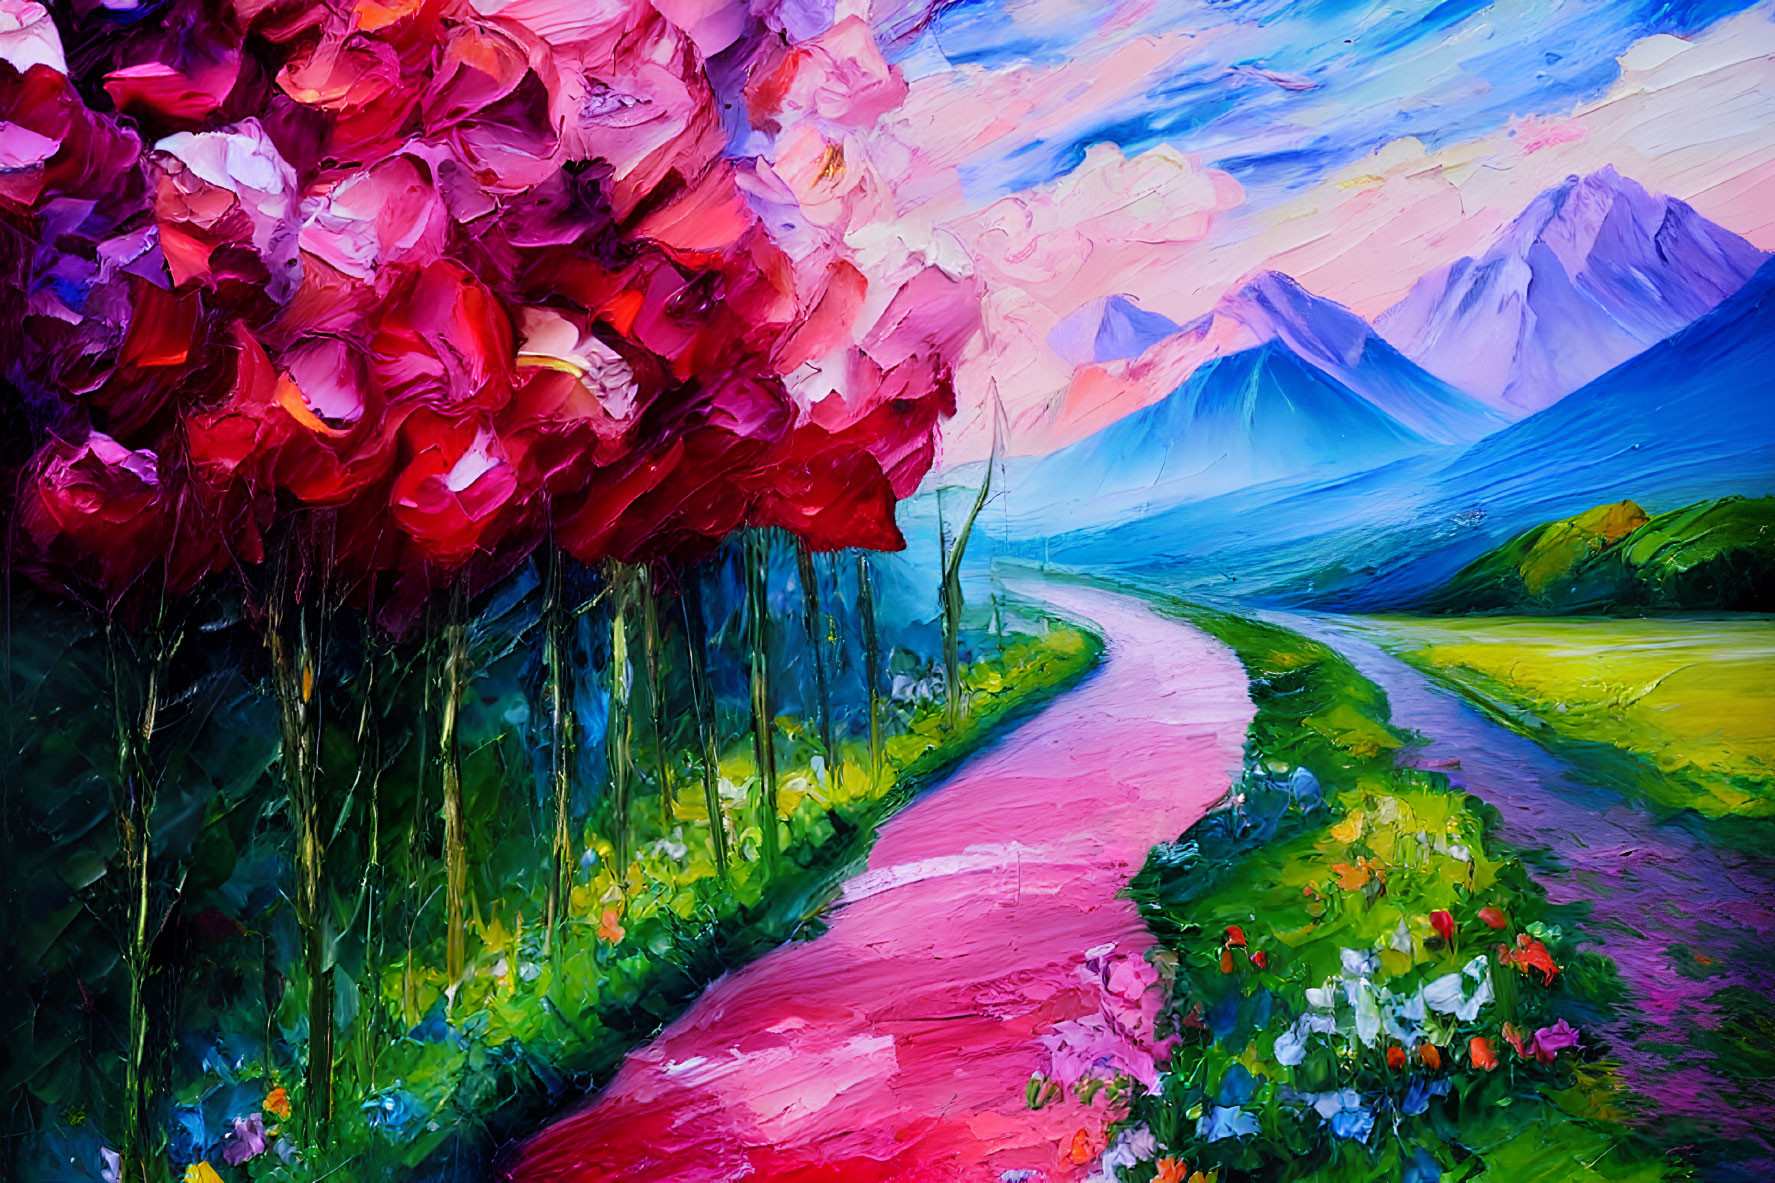 Colorful Impressionistic Painting of Flower-Lined Path to Mountains